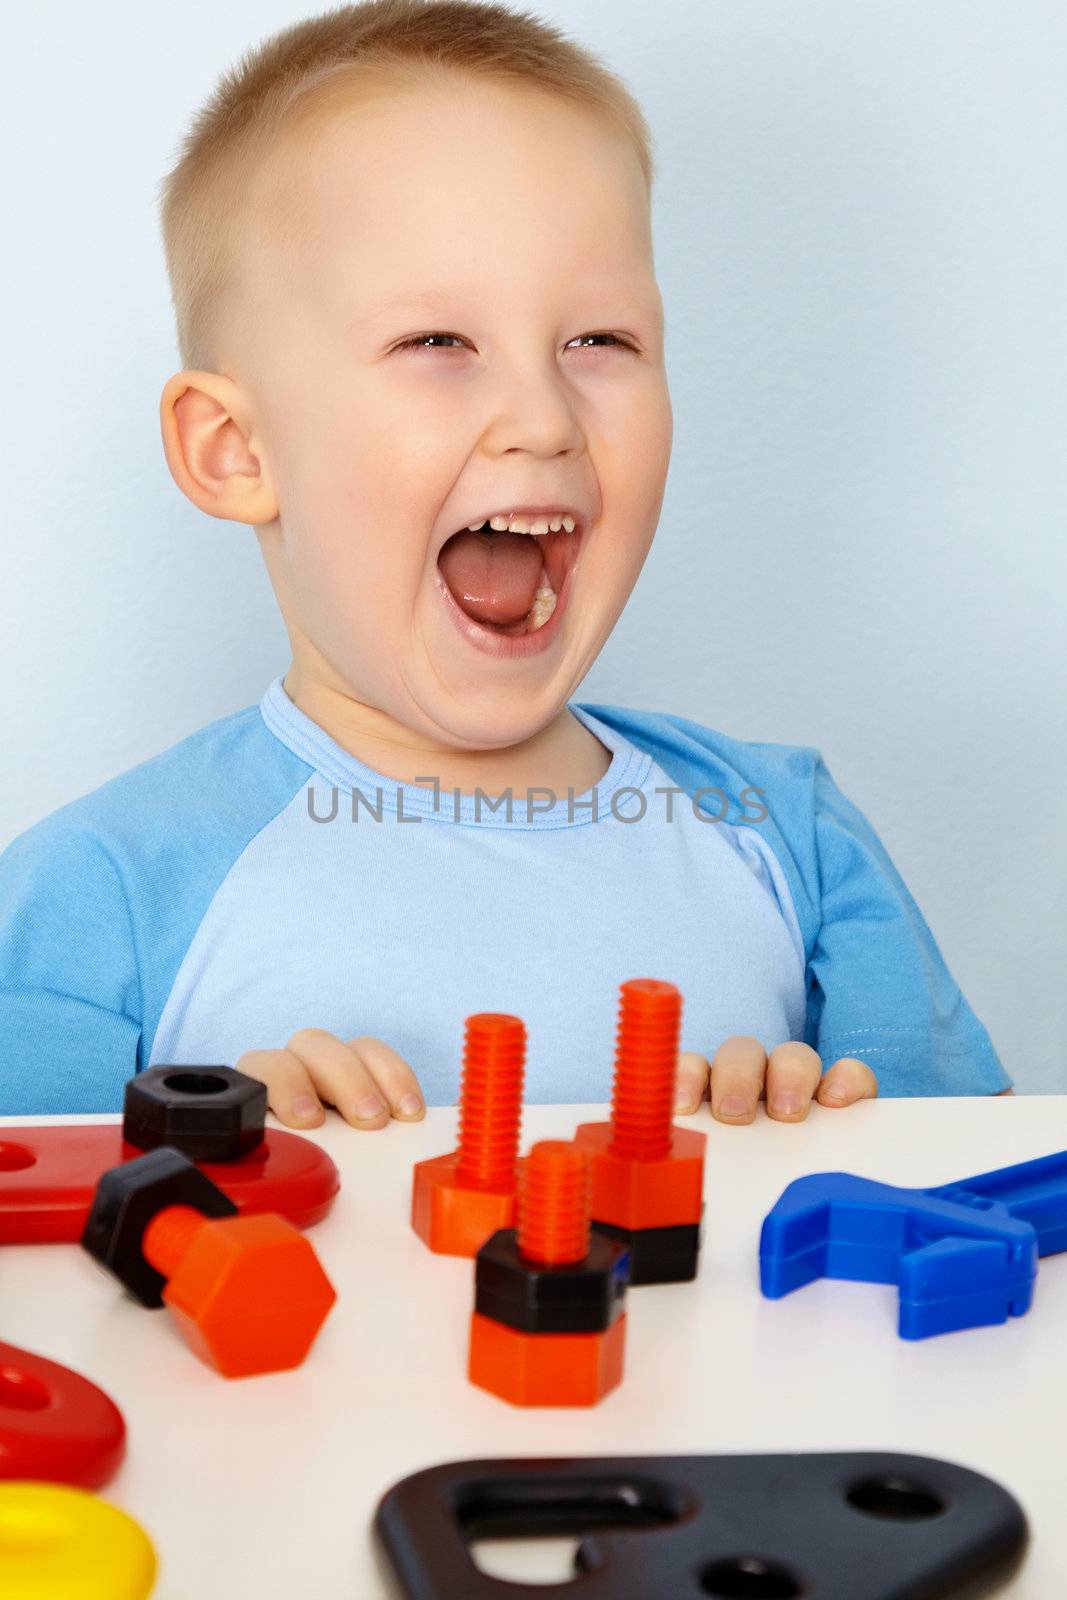 Jubilant children at the table with toys